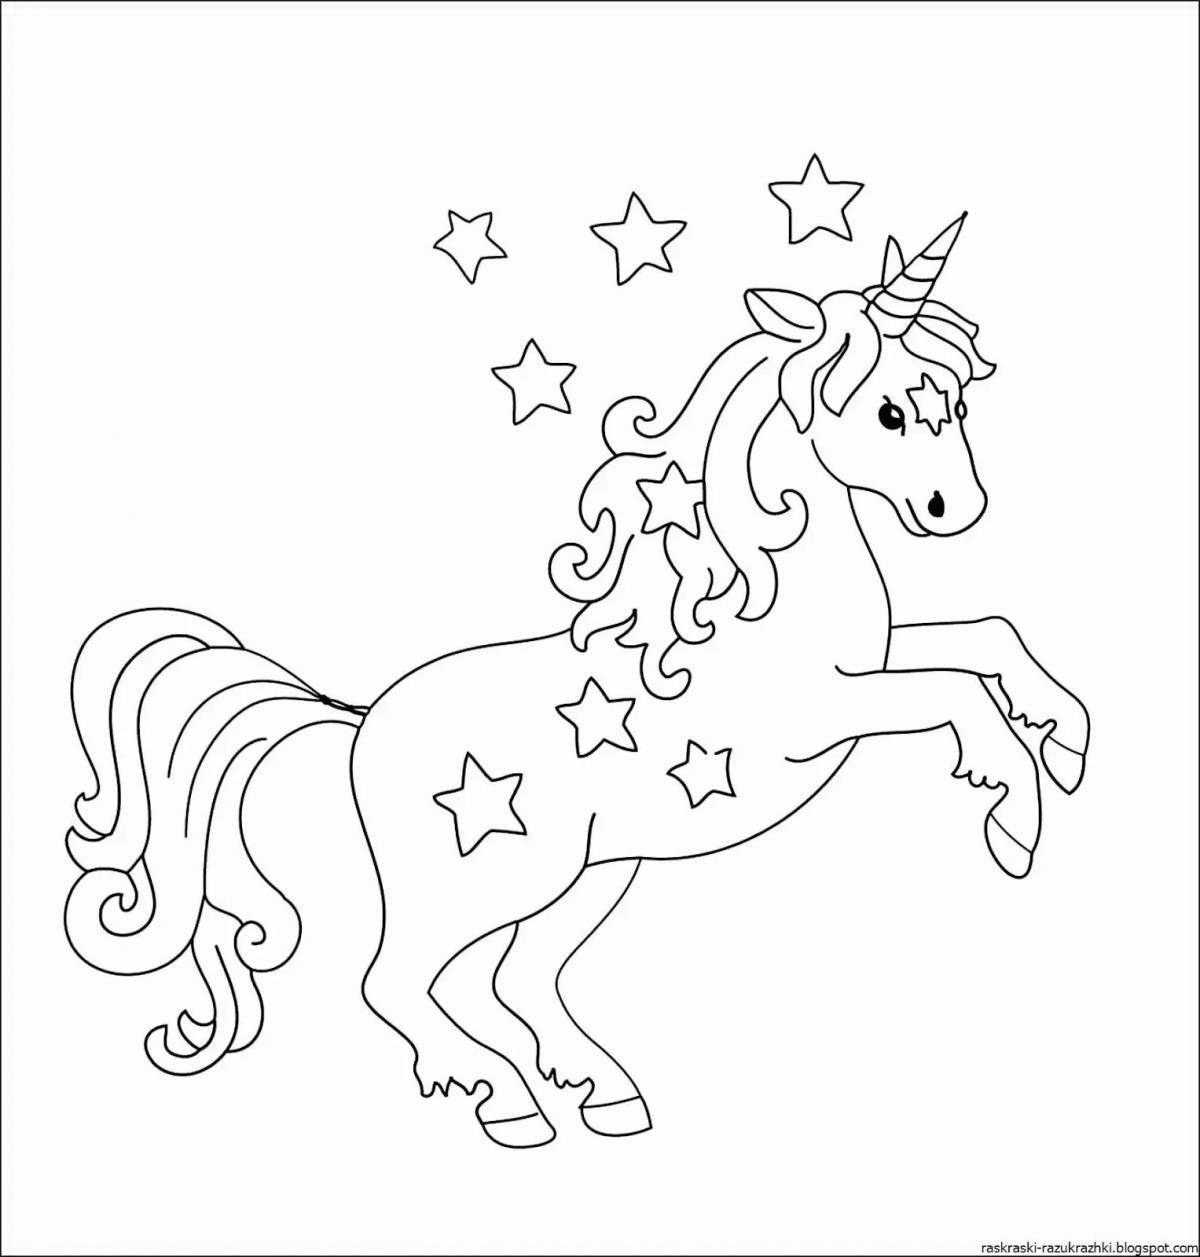 Unicorn drawing for kids #3